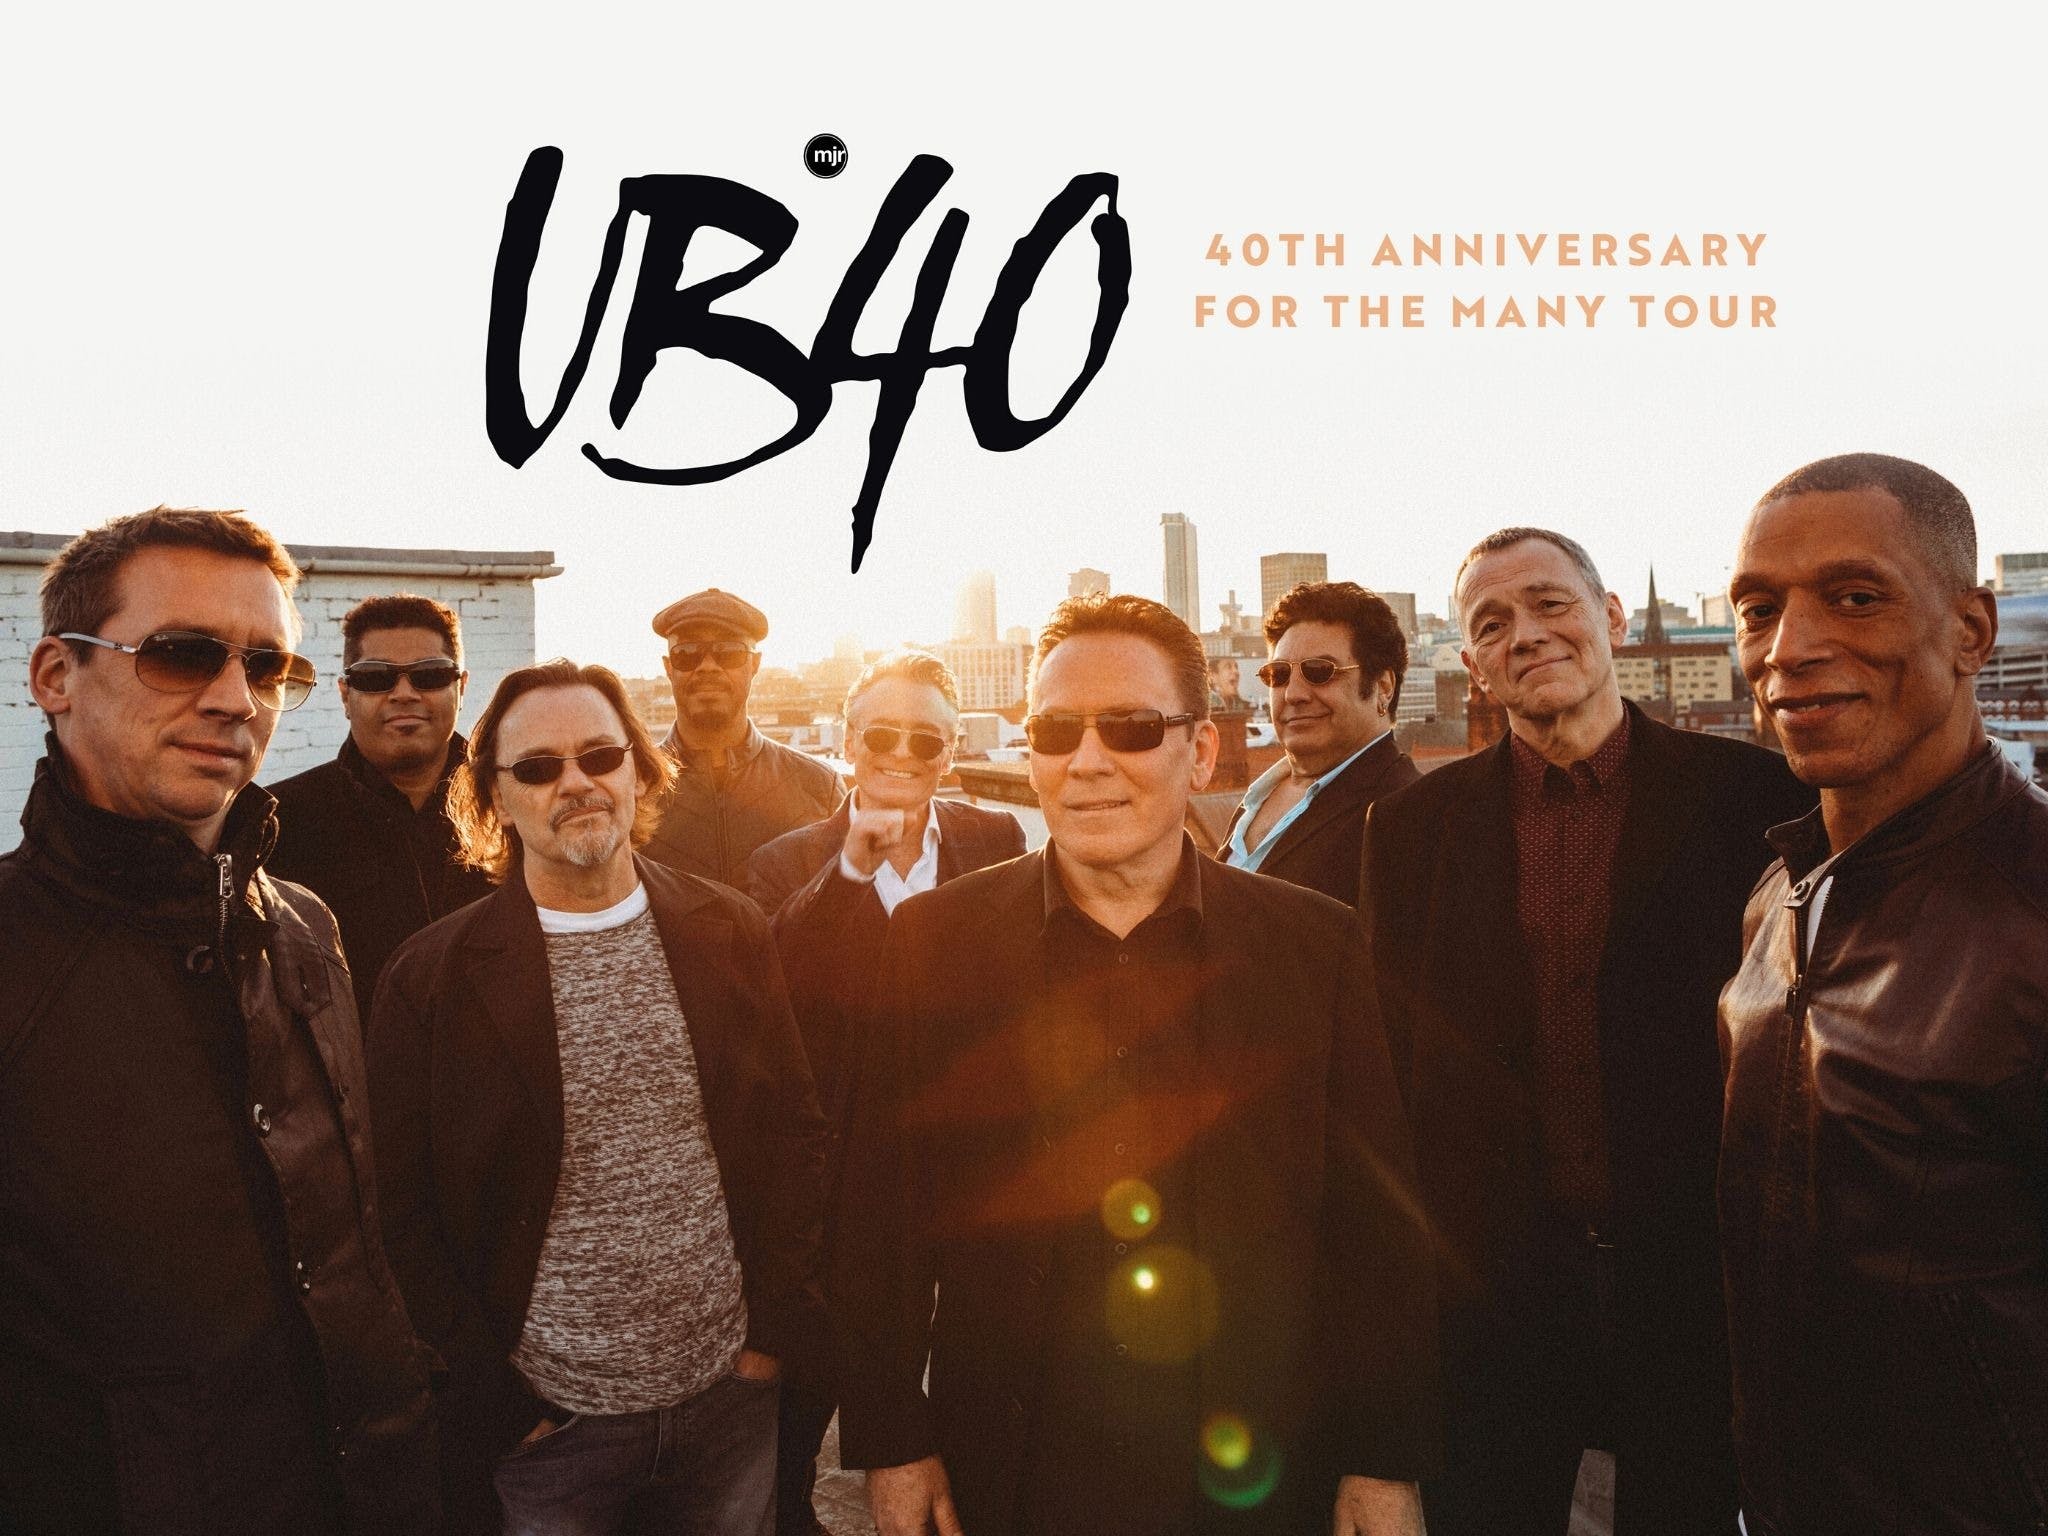 UB40 40th Anniversary Tour - Accommodation Bookings